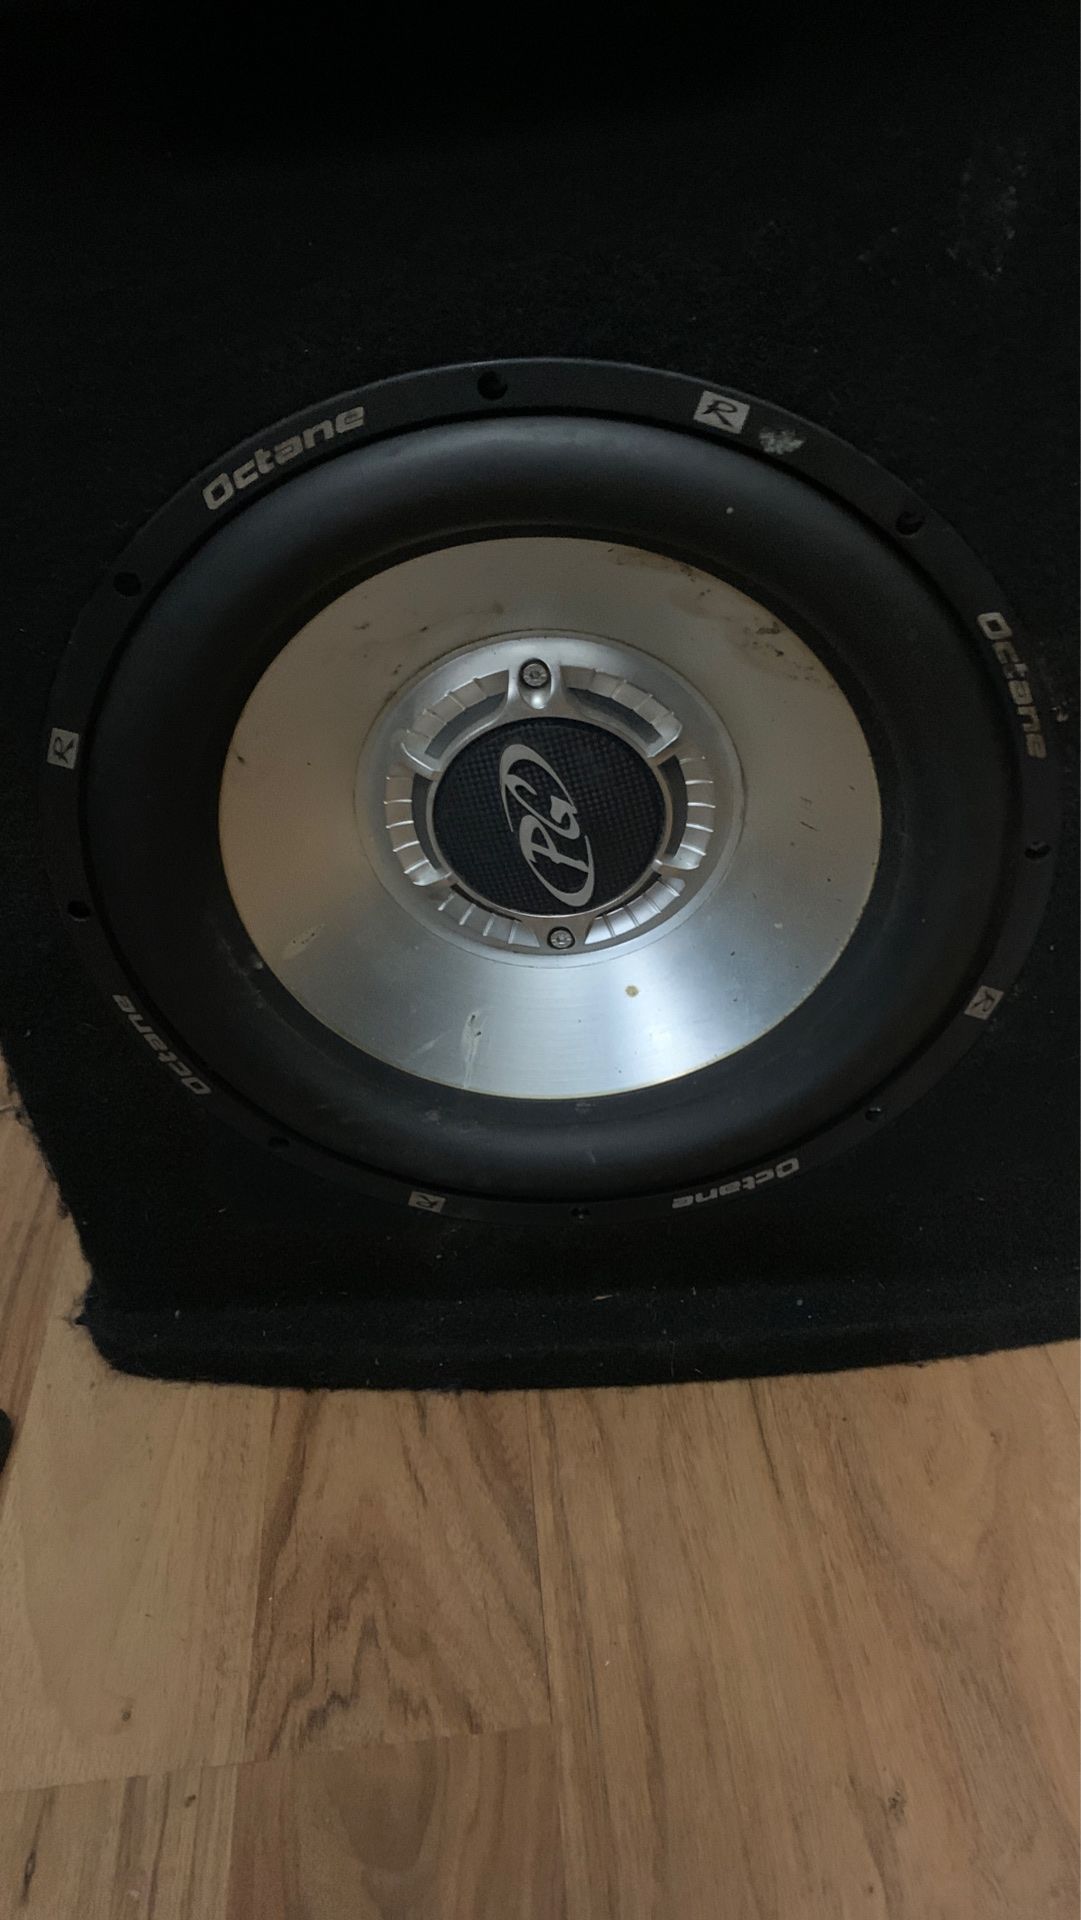 PG Octane 12” Subwoofer w/ enclosed box and Coustic Amp 240 watts $80